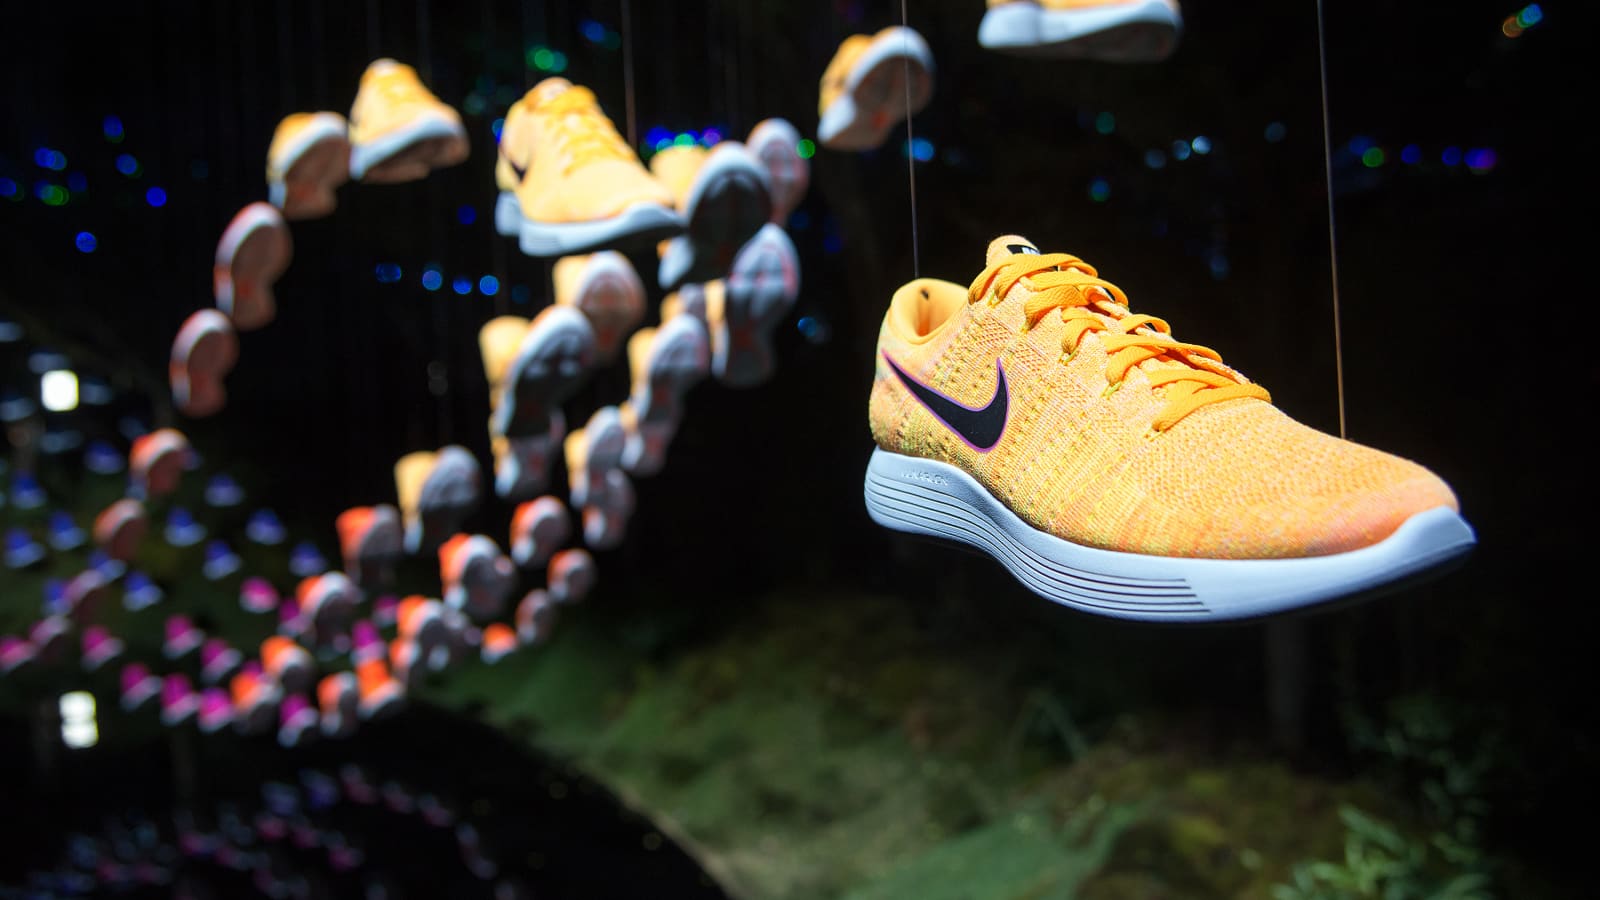 hará formar Objetado Nike worries will remain, even if it quashes doubters